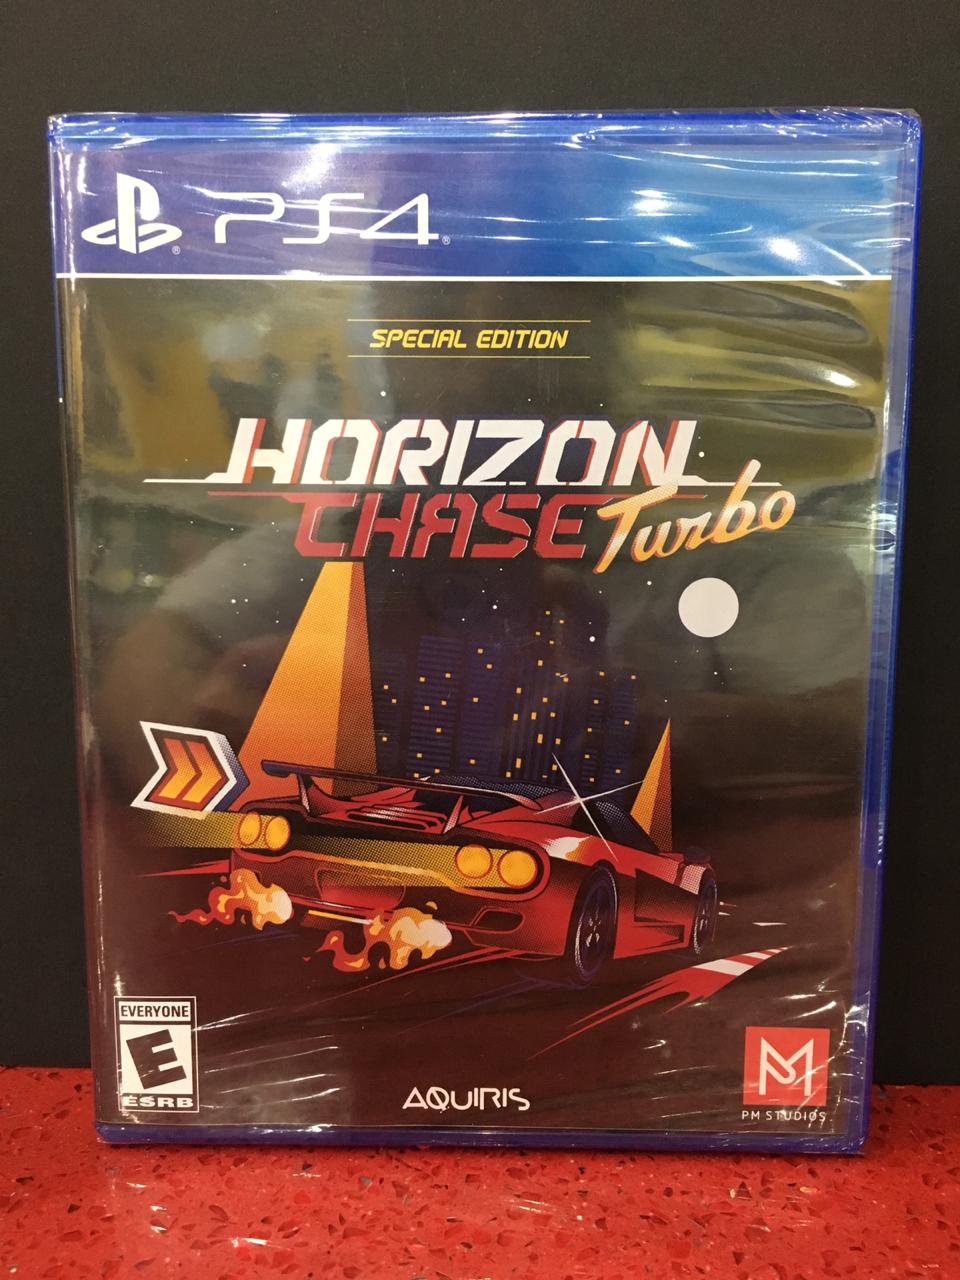 PS4-Horizon-Chase-Turbo-Special-Edition-game.jpg